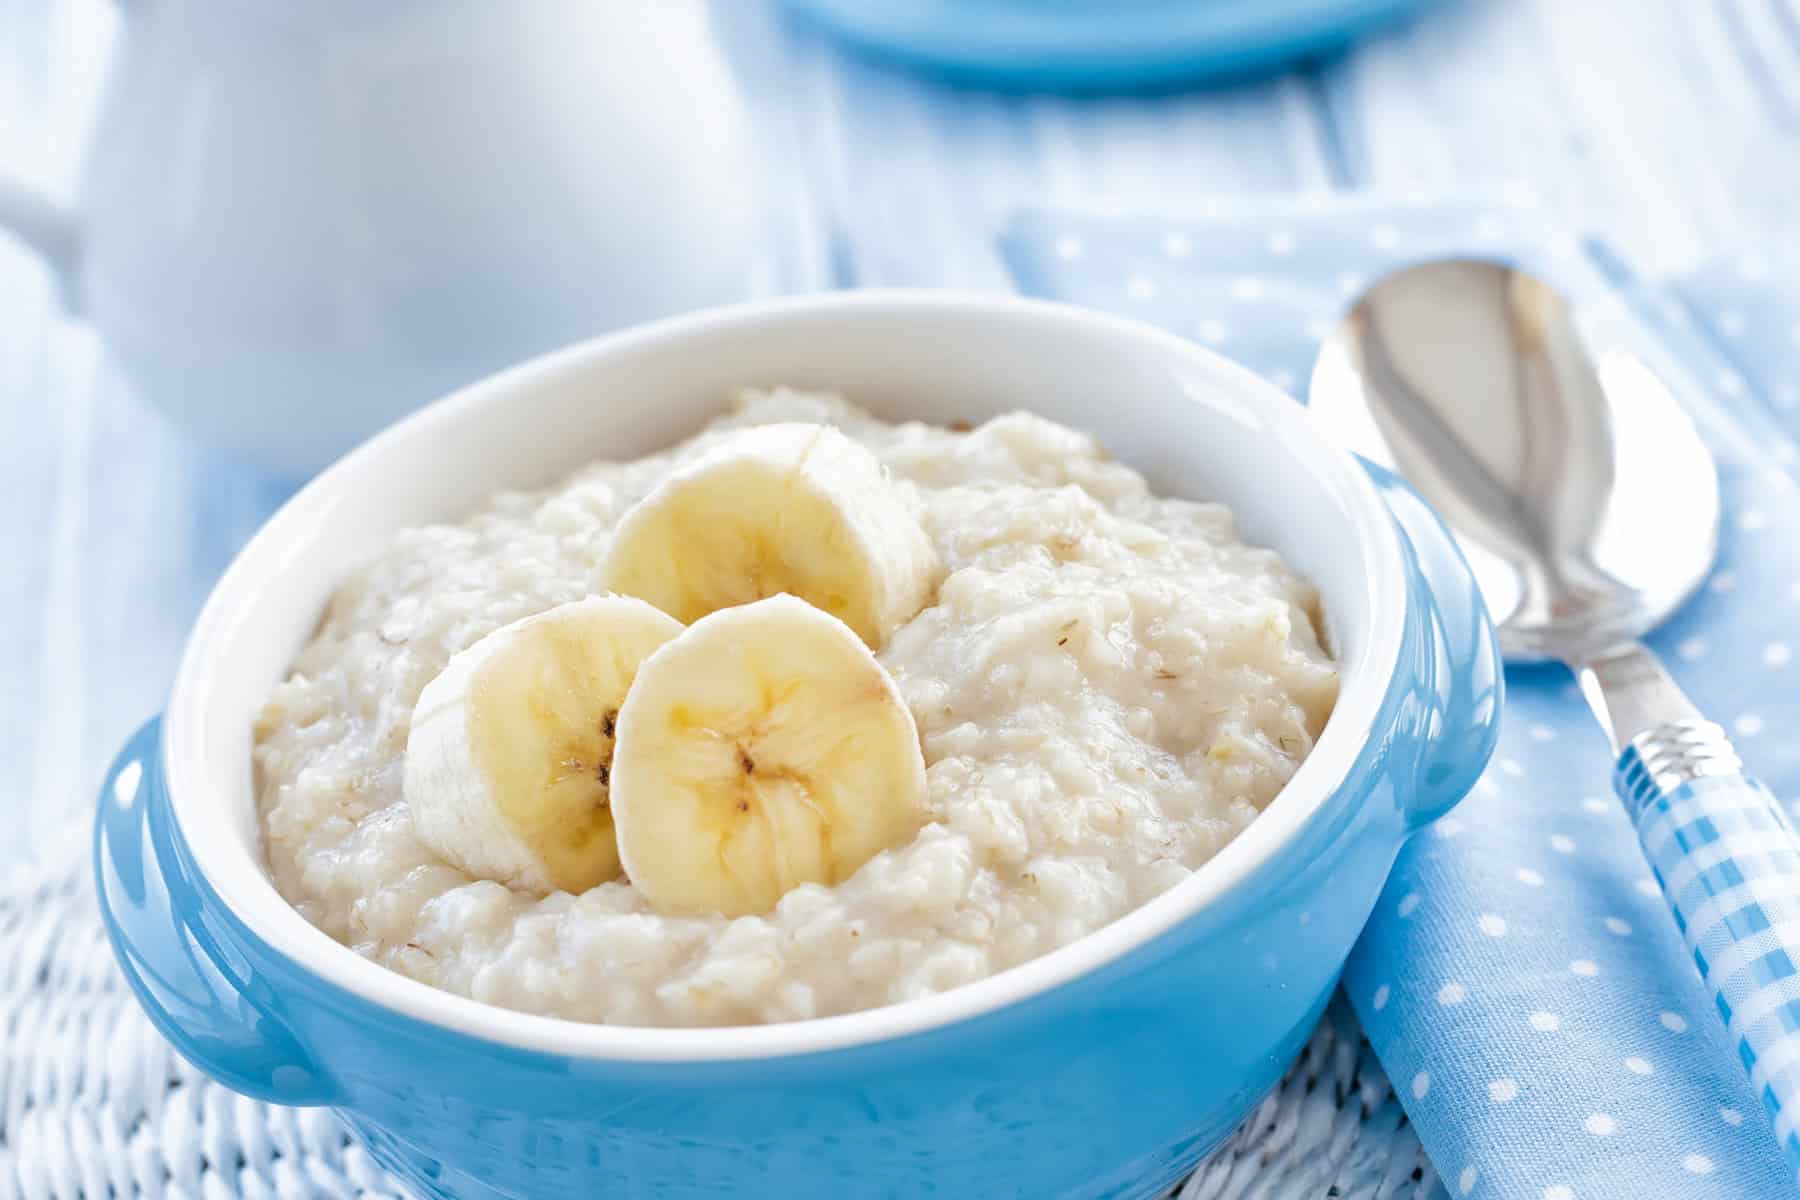 How to Make Hot Oatmeal for Breakfast